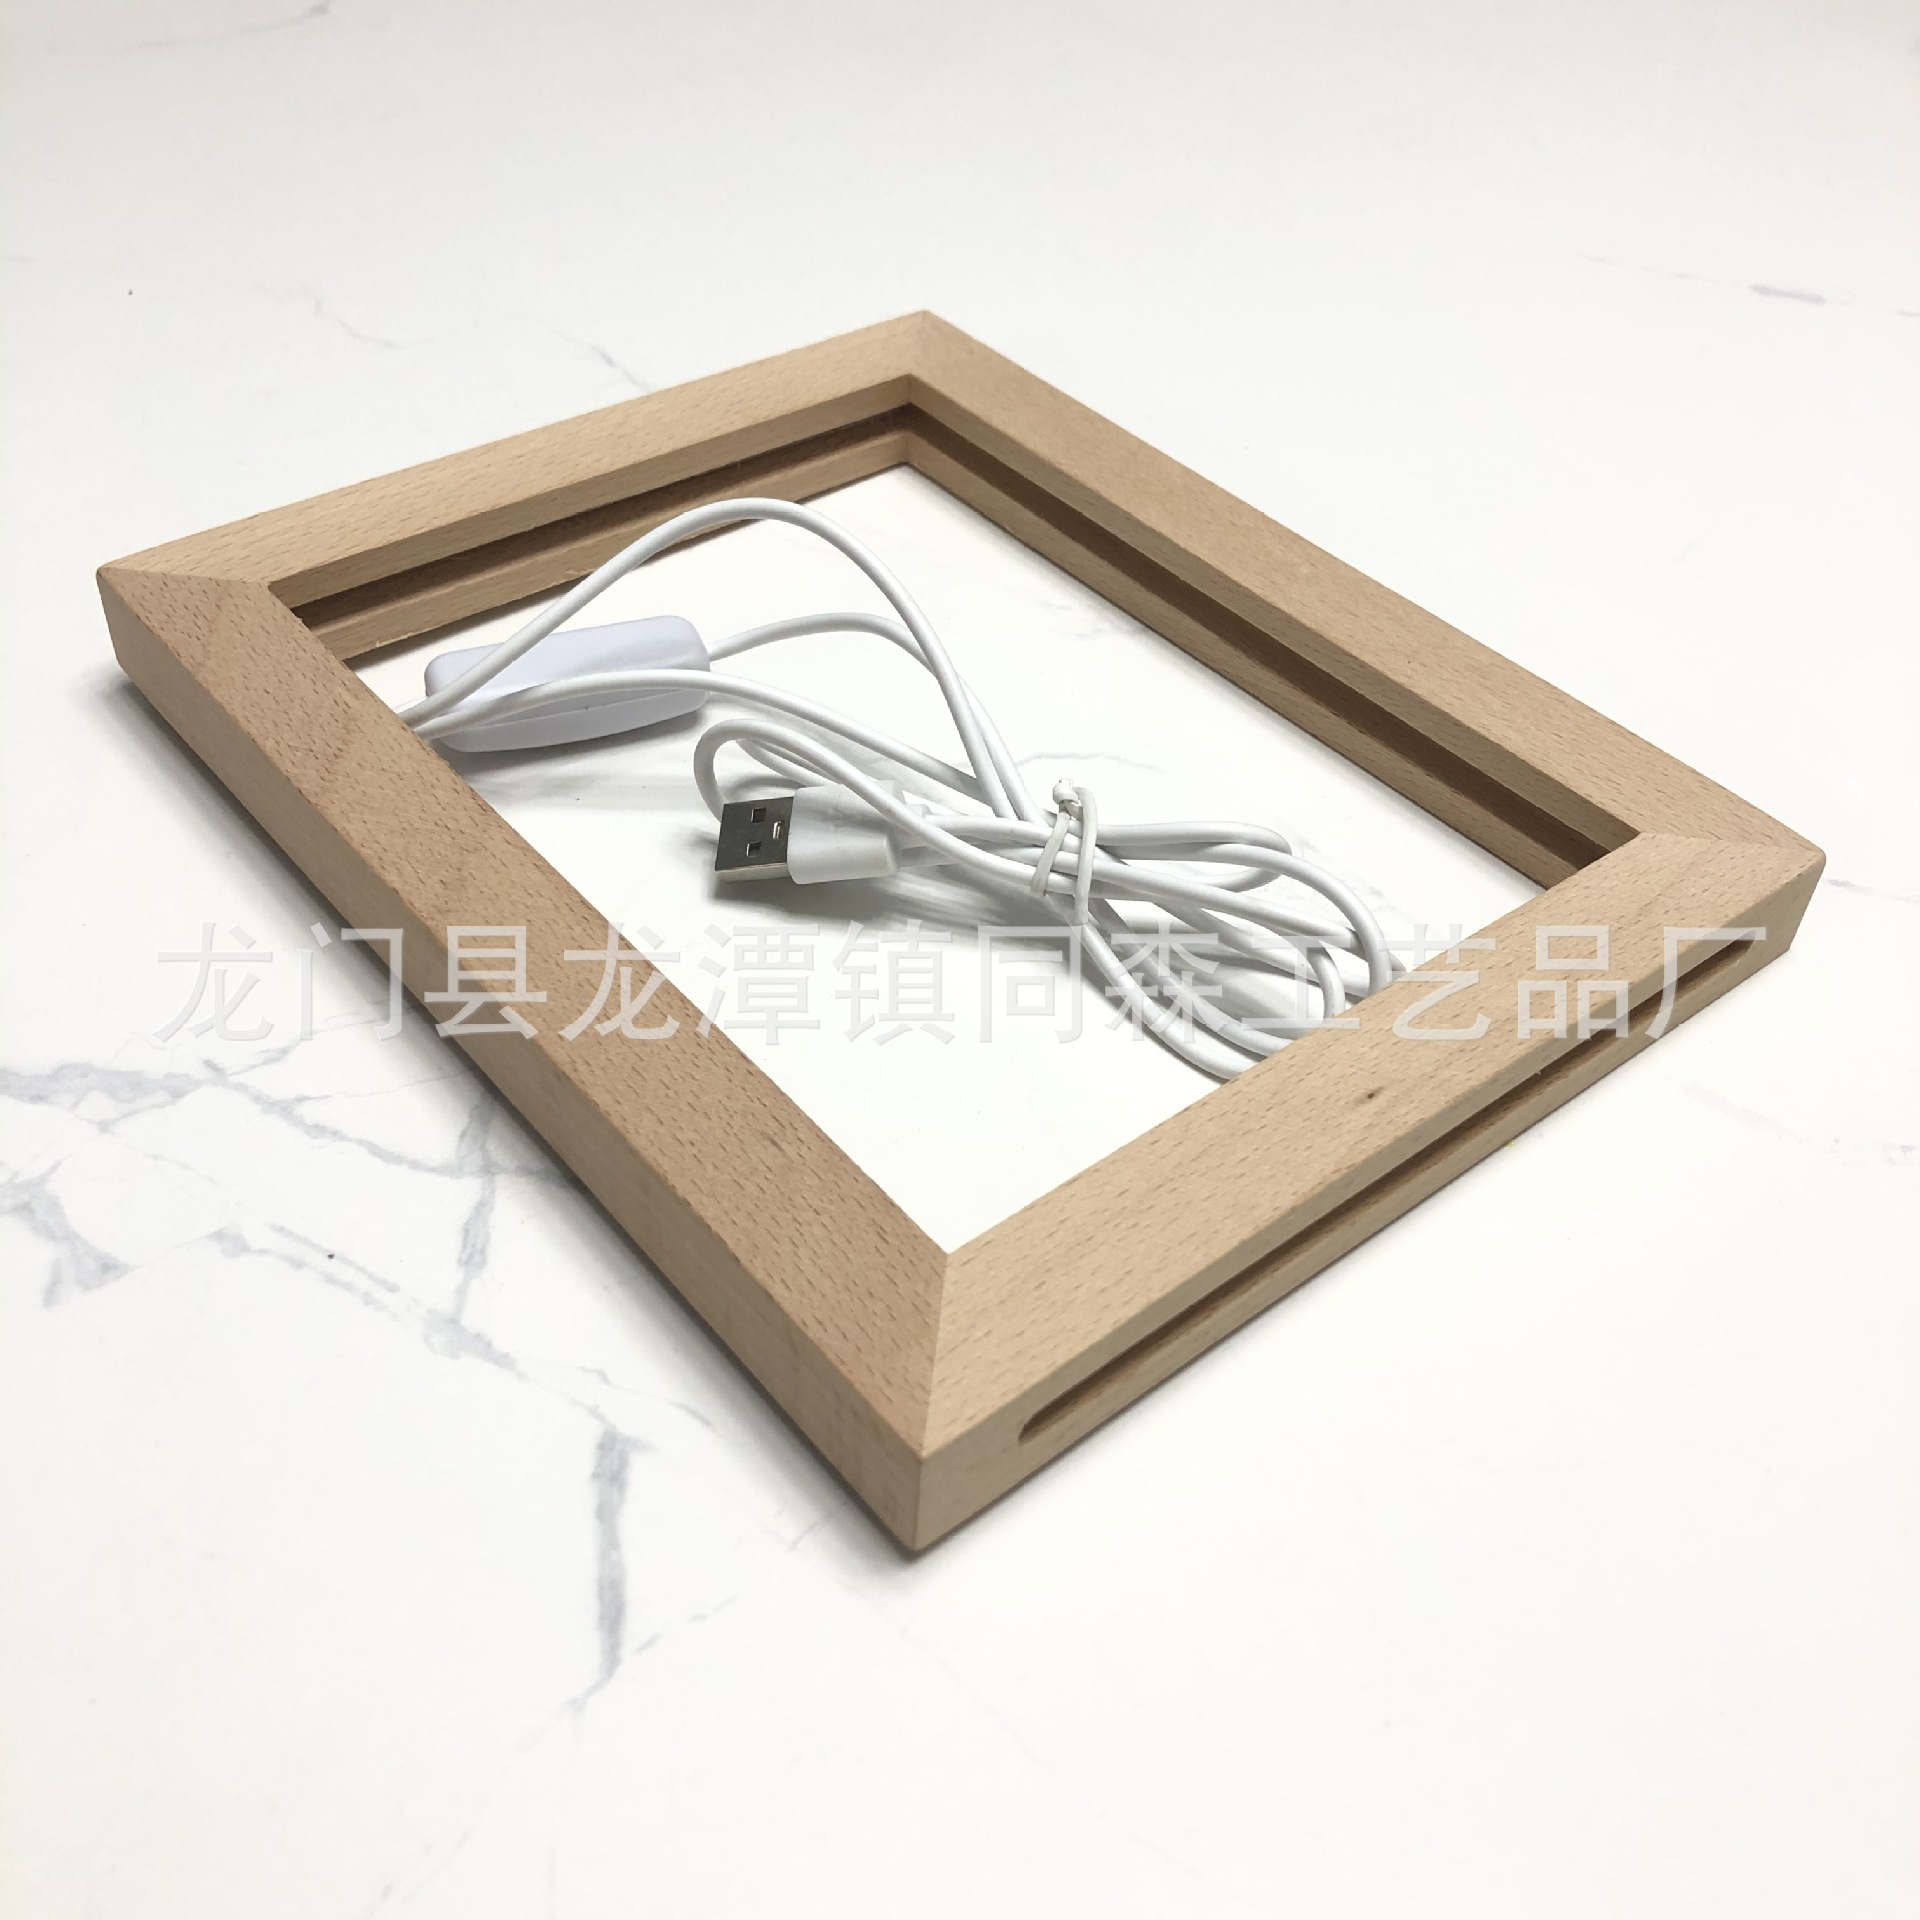 Solid Wood Luminous Photo Frame 3d Small Night Lamp Photo Frame Diy Wooden Photo Frame Acrylic Led Light Creative Leaf Carving Photo Frame